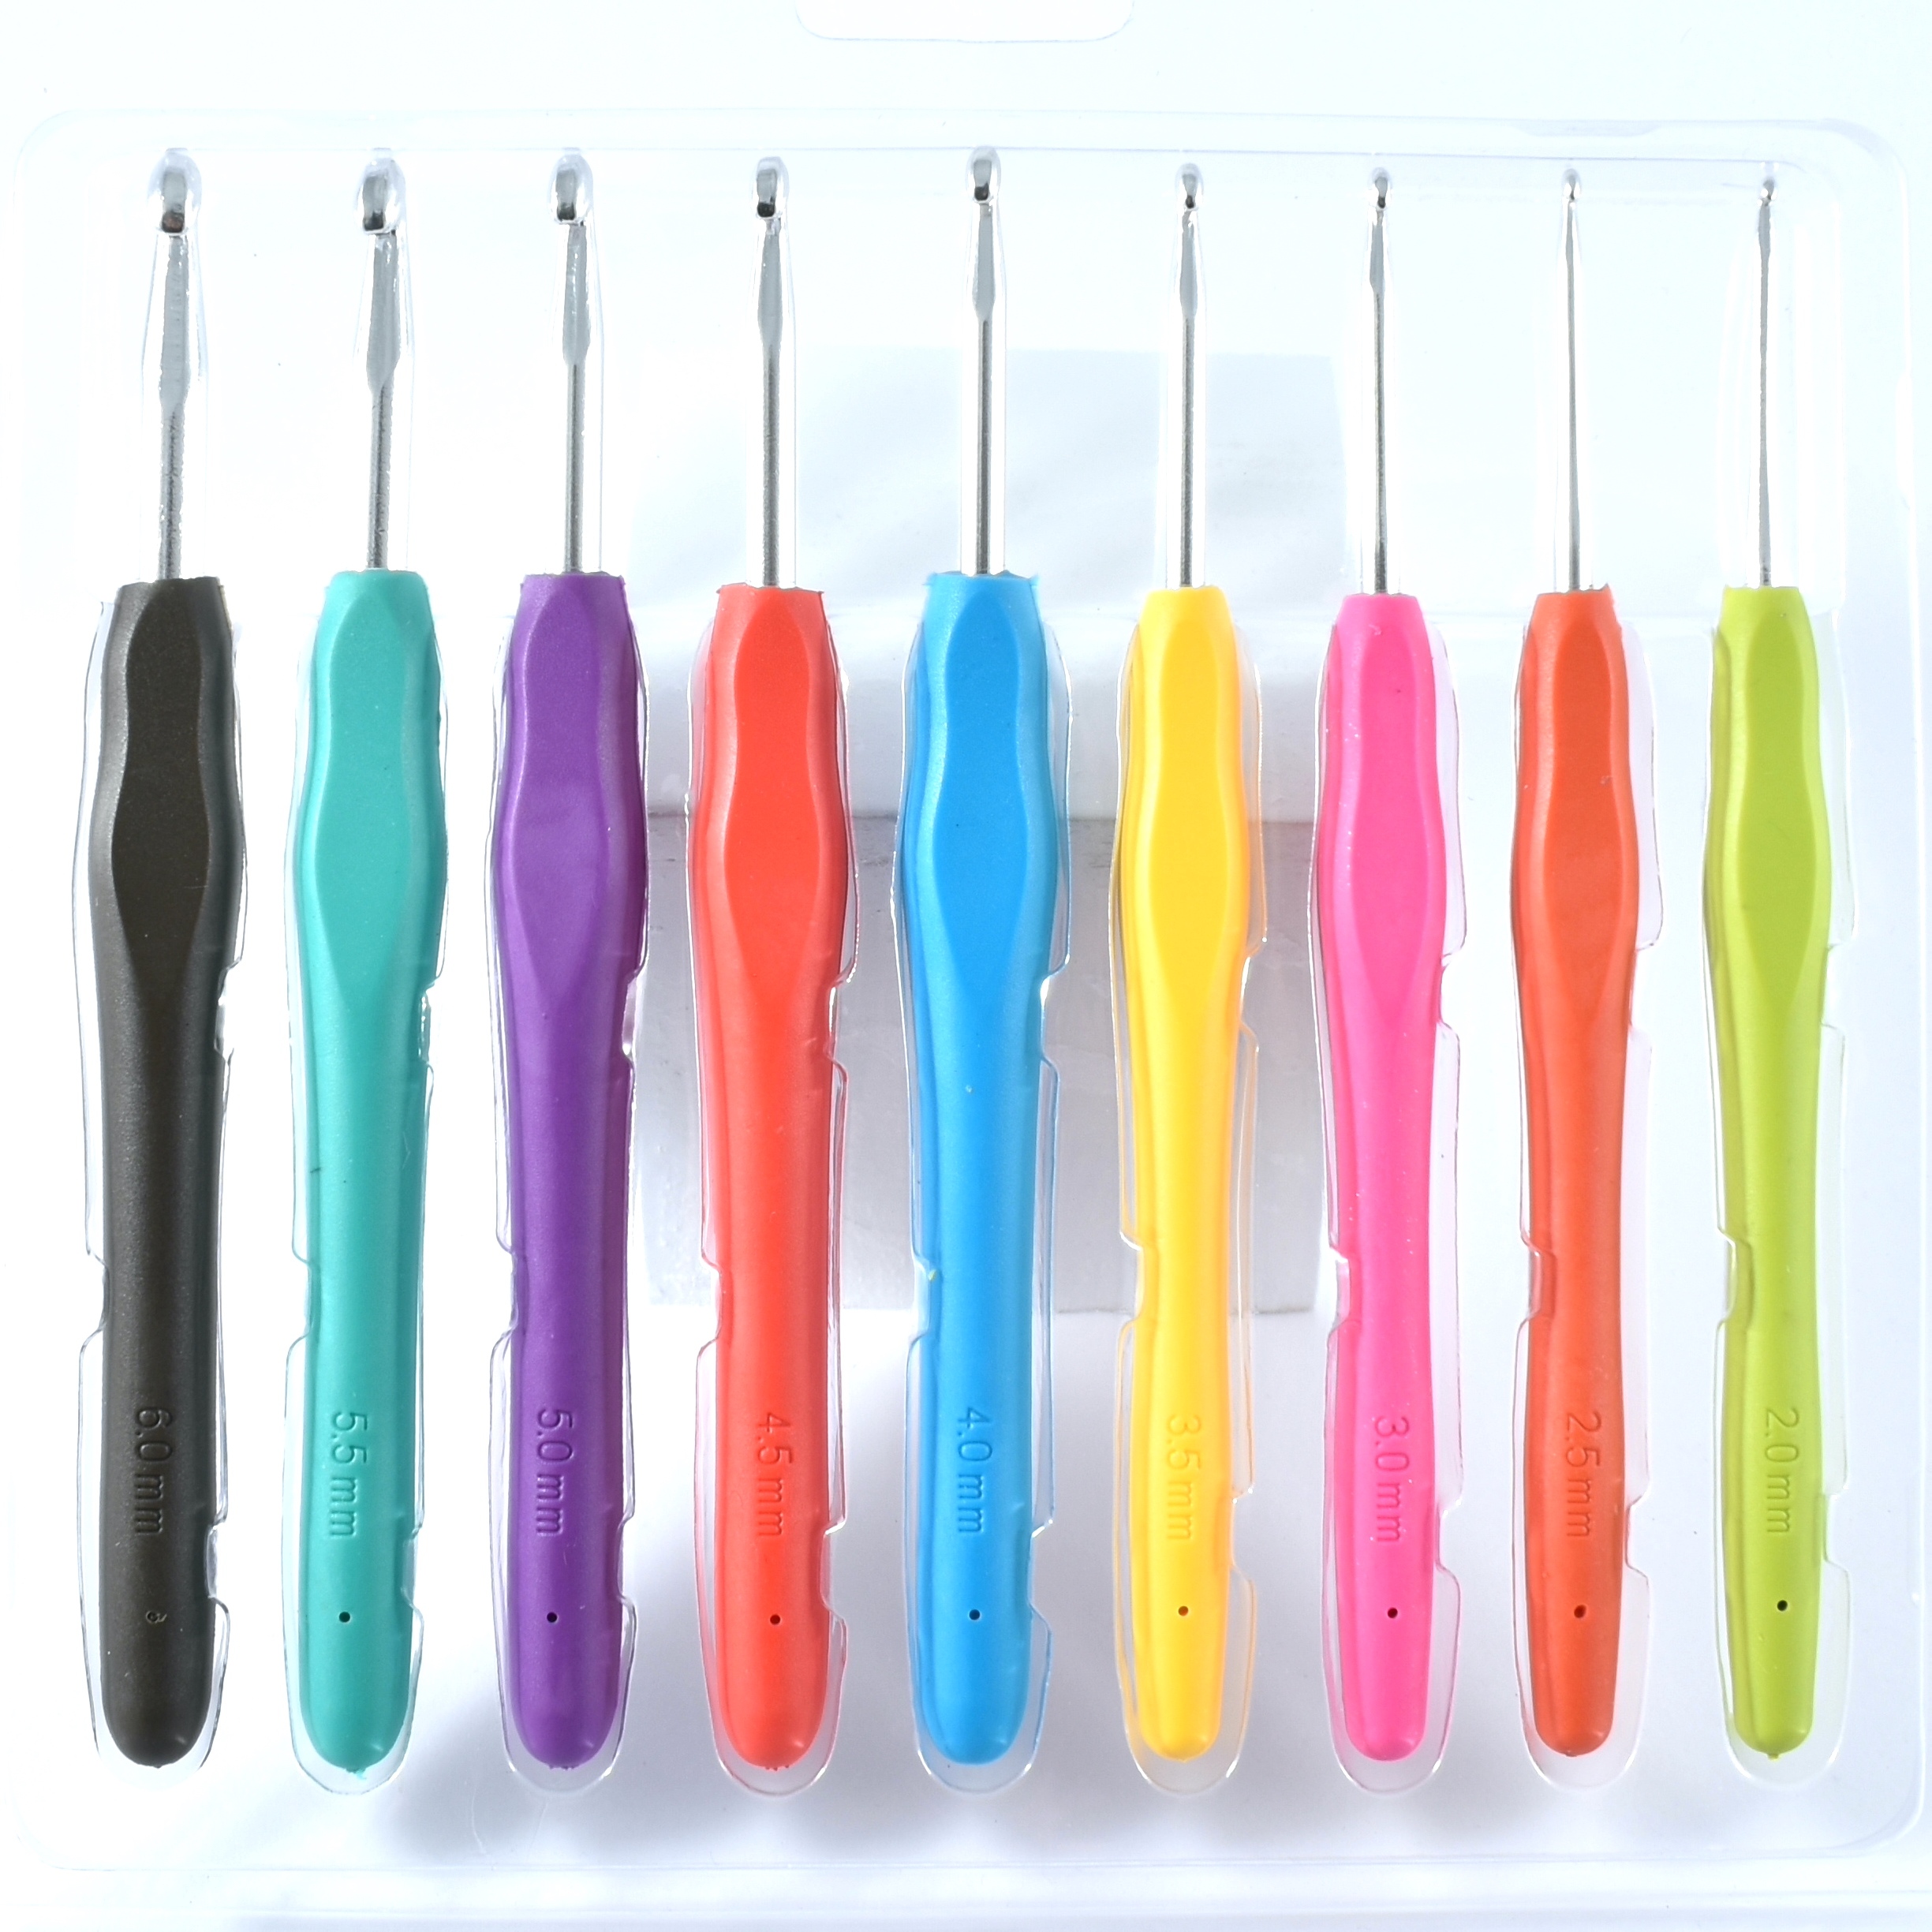 Crochet Hook Soft Grip Set of 9, sizes 2mm to 6mm - Fabric8